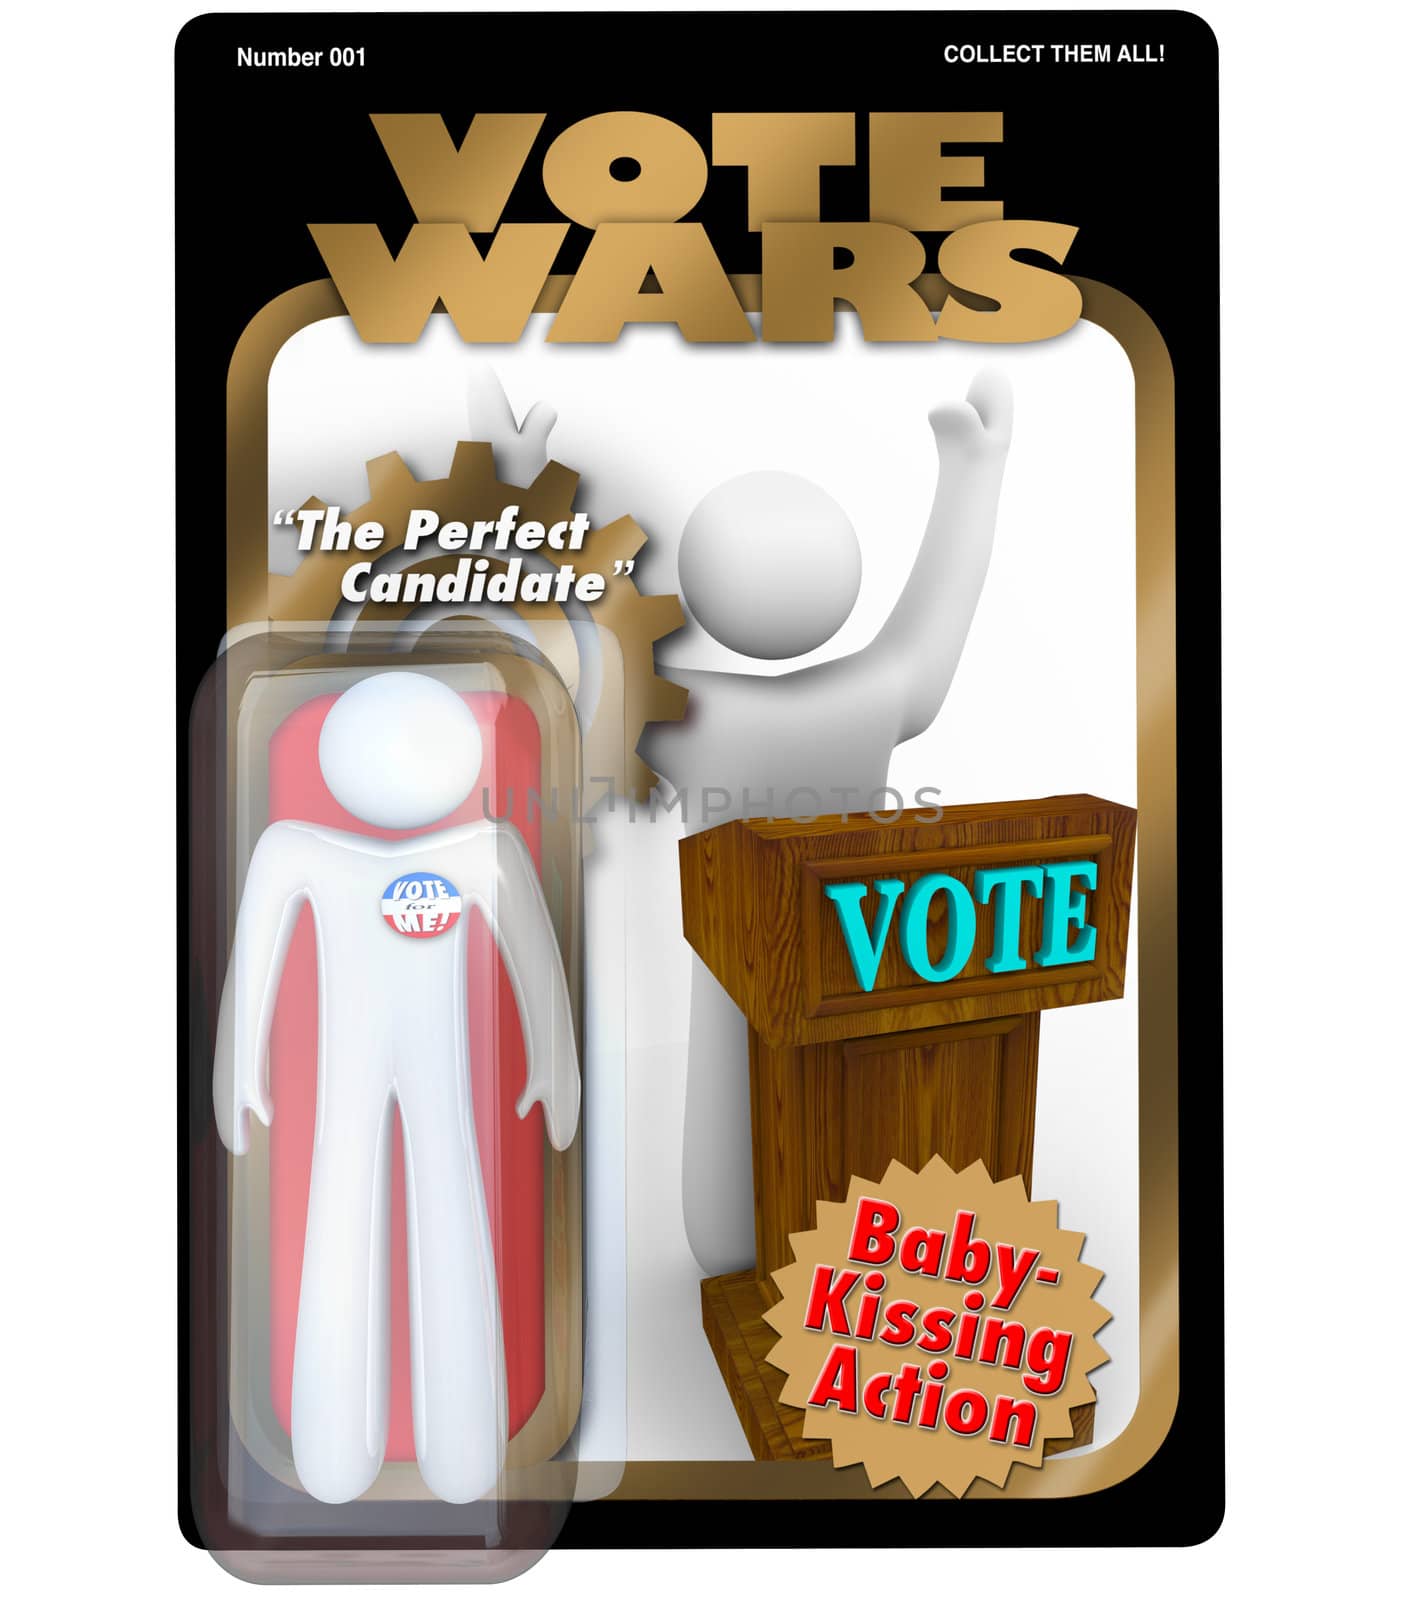 A candidate for election is packaged and sold as an action figure to promote his political campaign and quest for government office